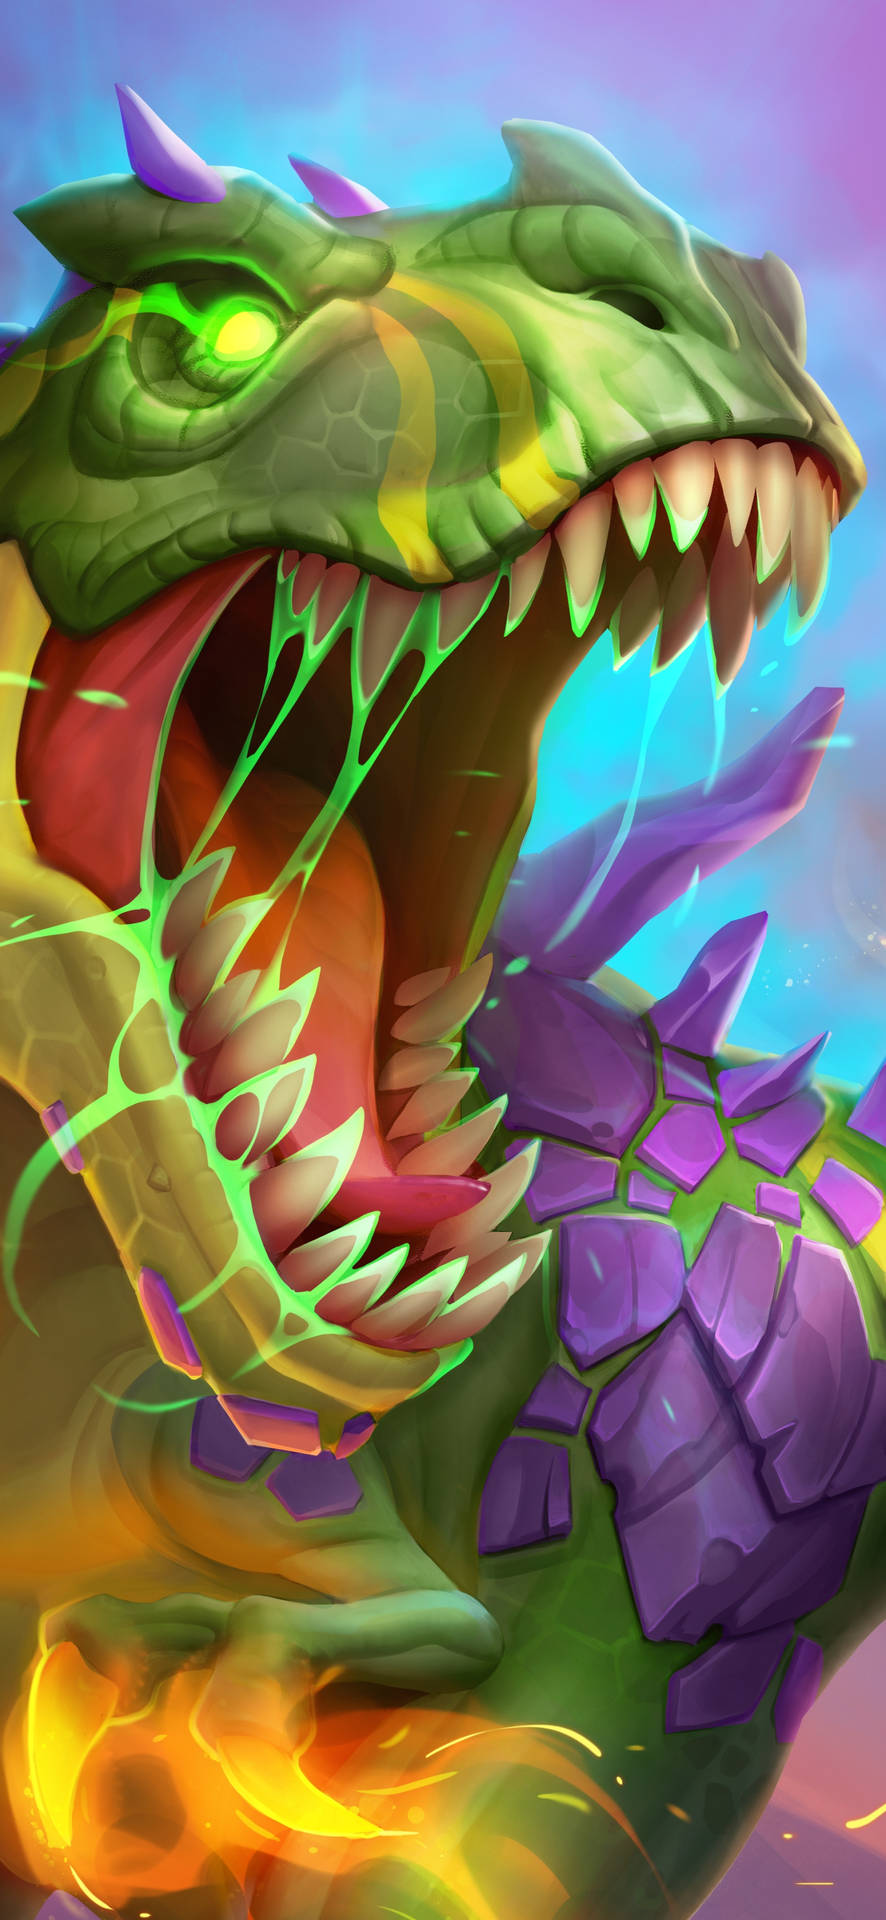 Devilsaur In Action On Hearthstone Mobile Game Background